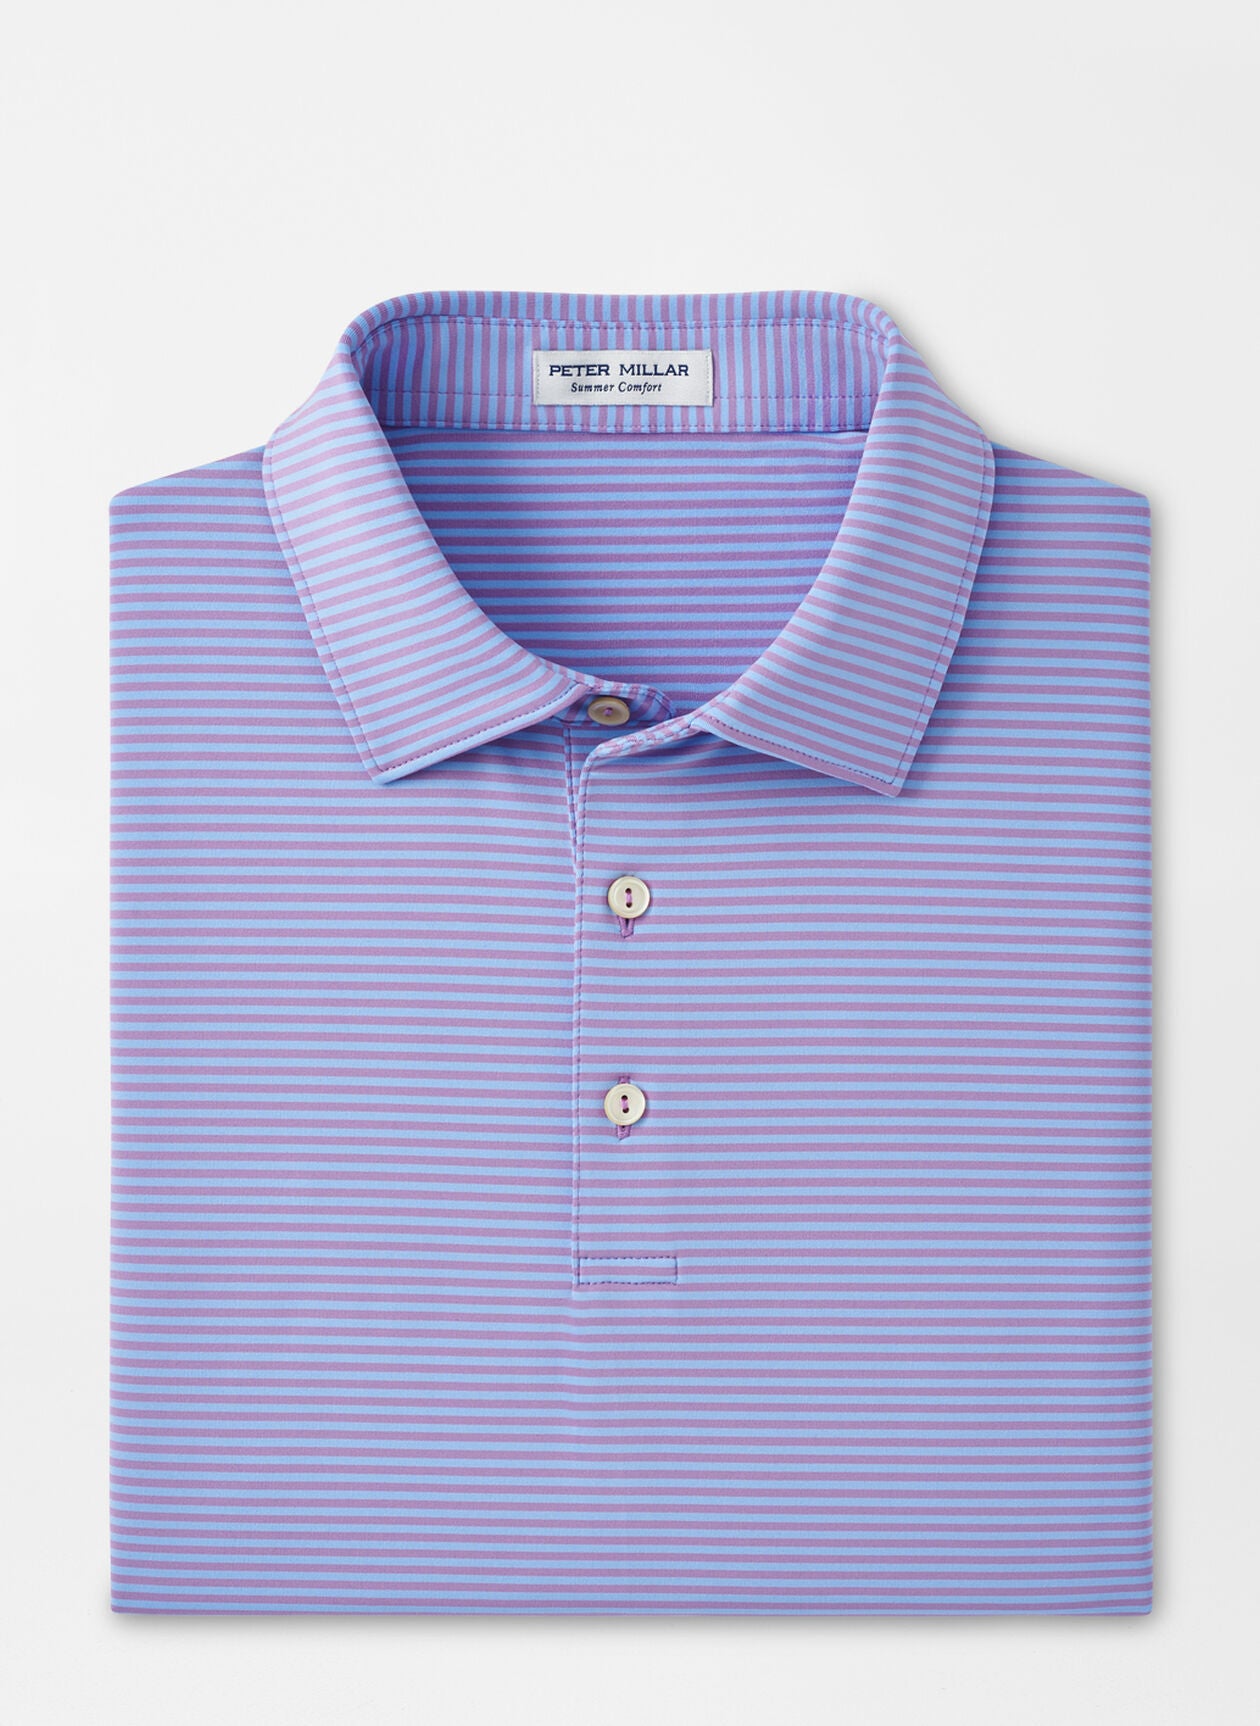 Hales Performance Jersey Polo in Dragonfly